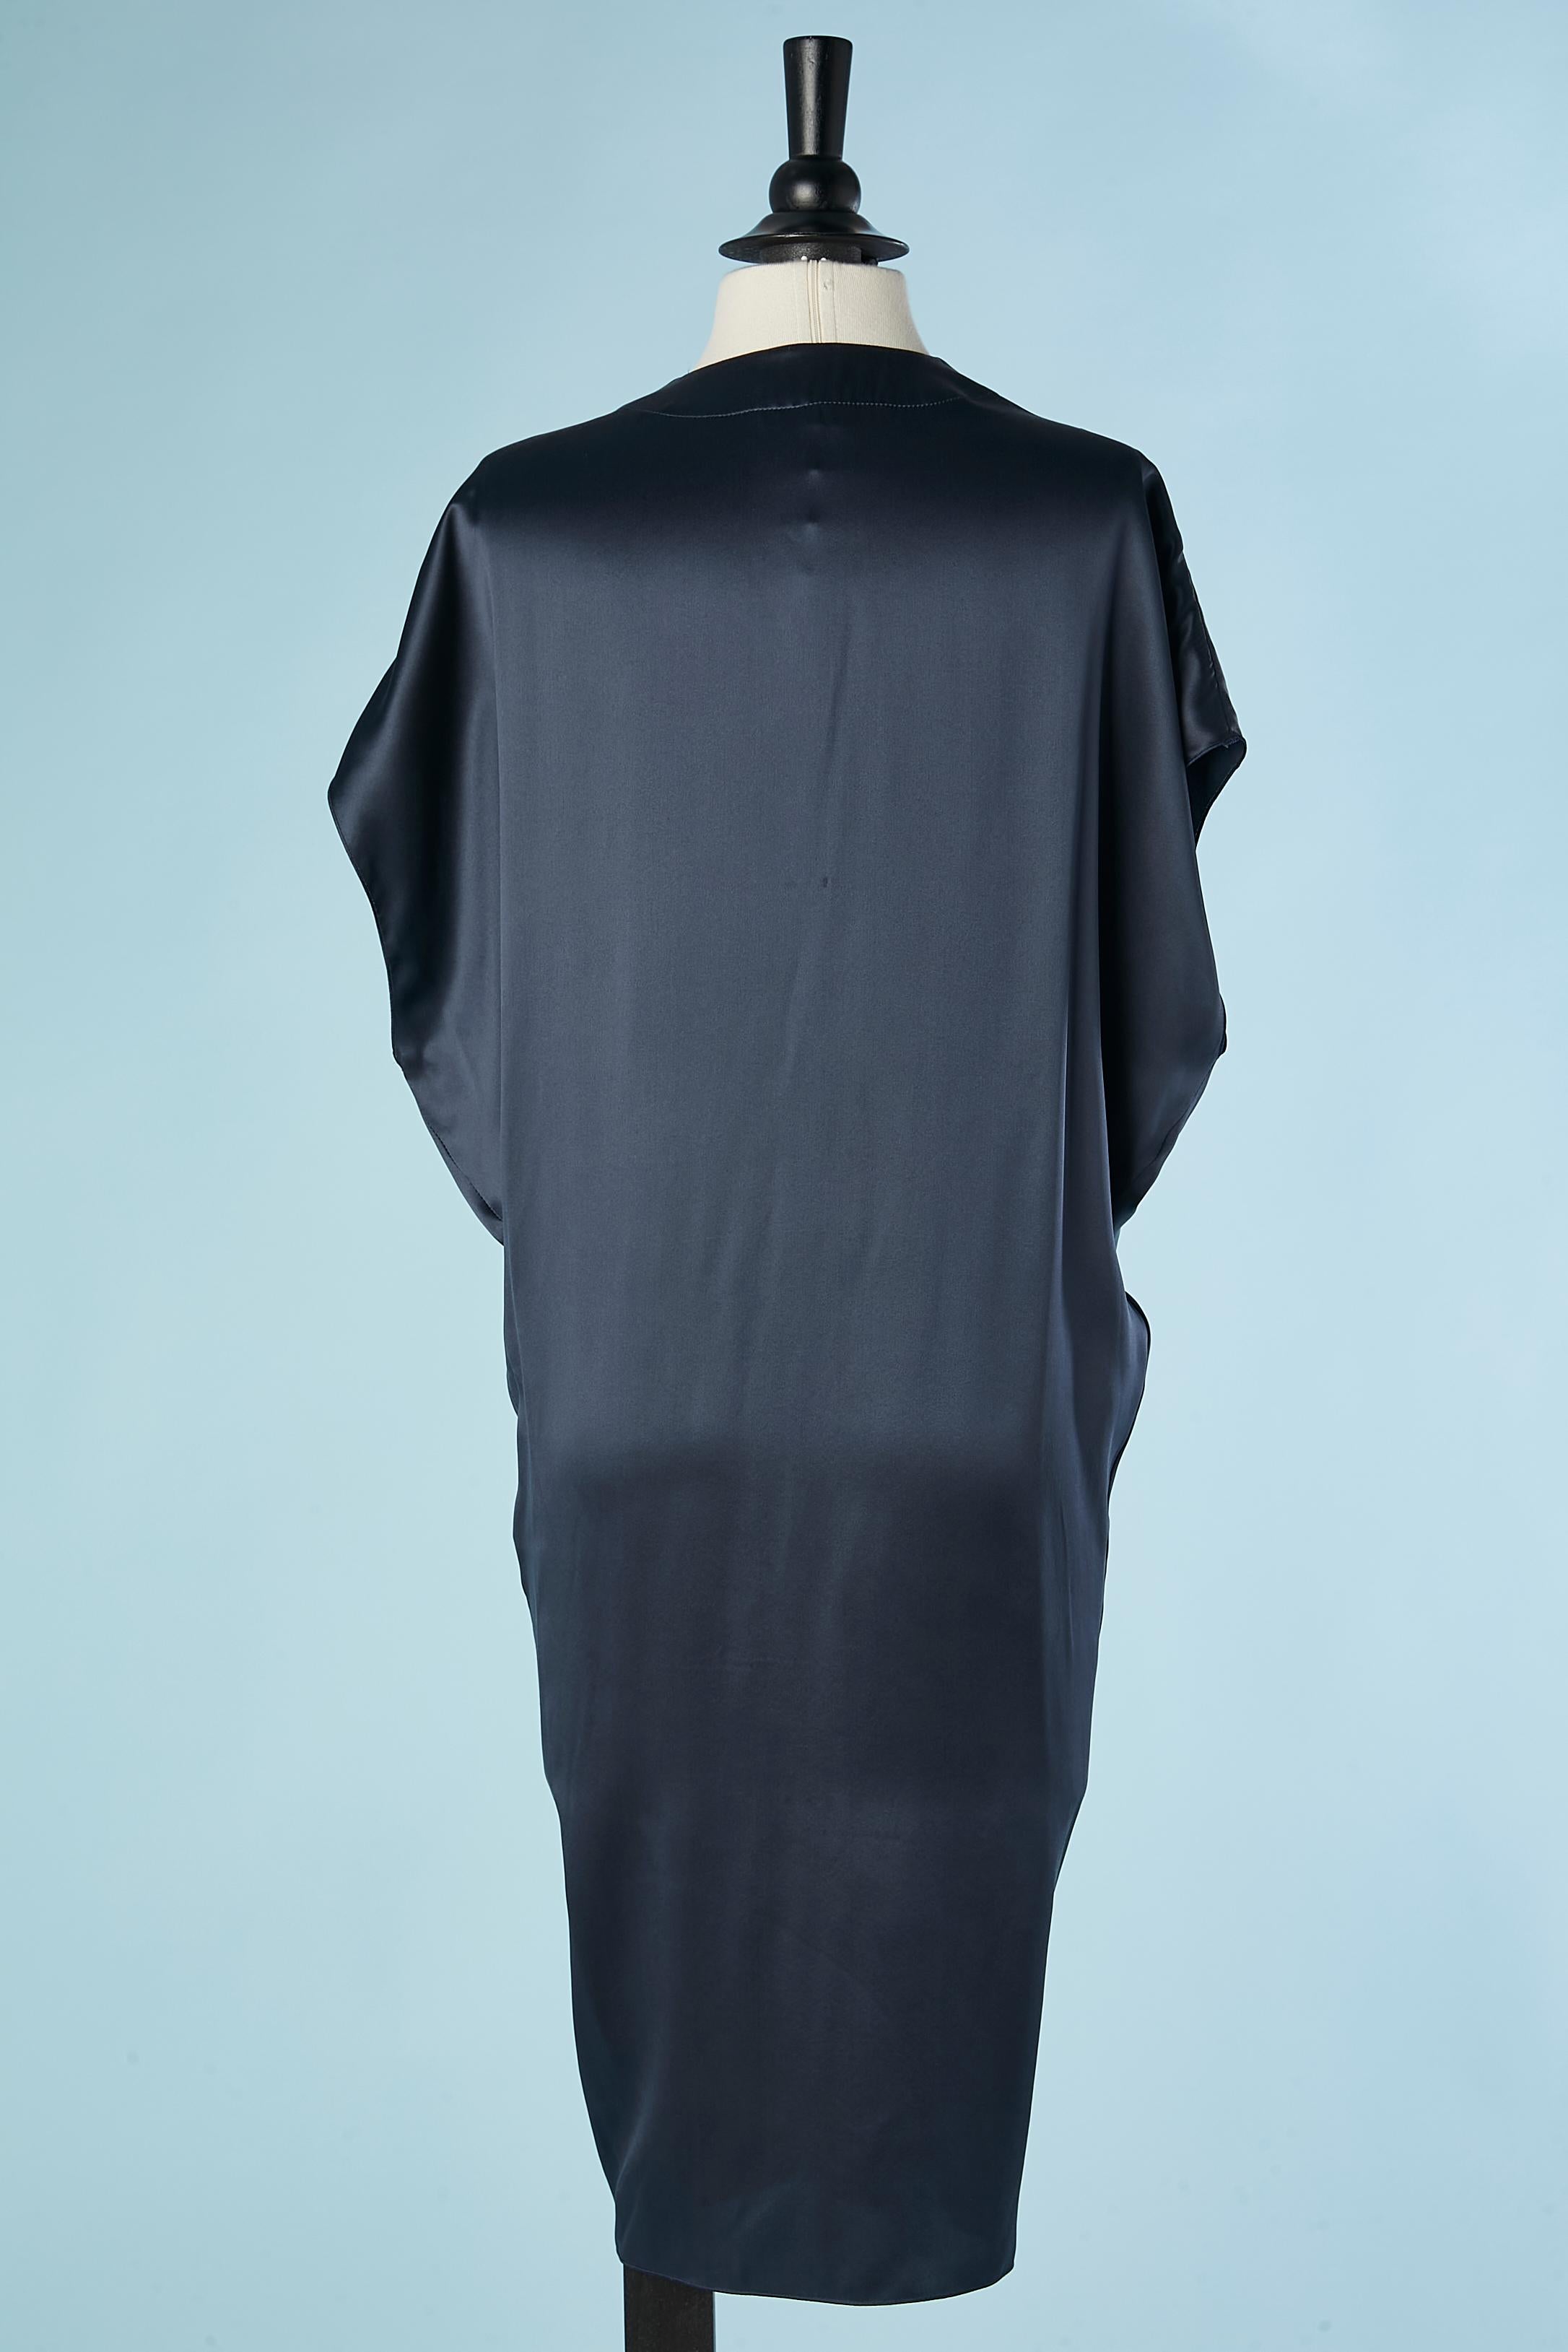 Navy blue draped cocktail dress with black satin bow Lanvin by Alber Elbaz  For Sale 2